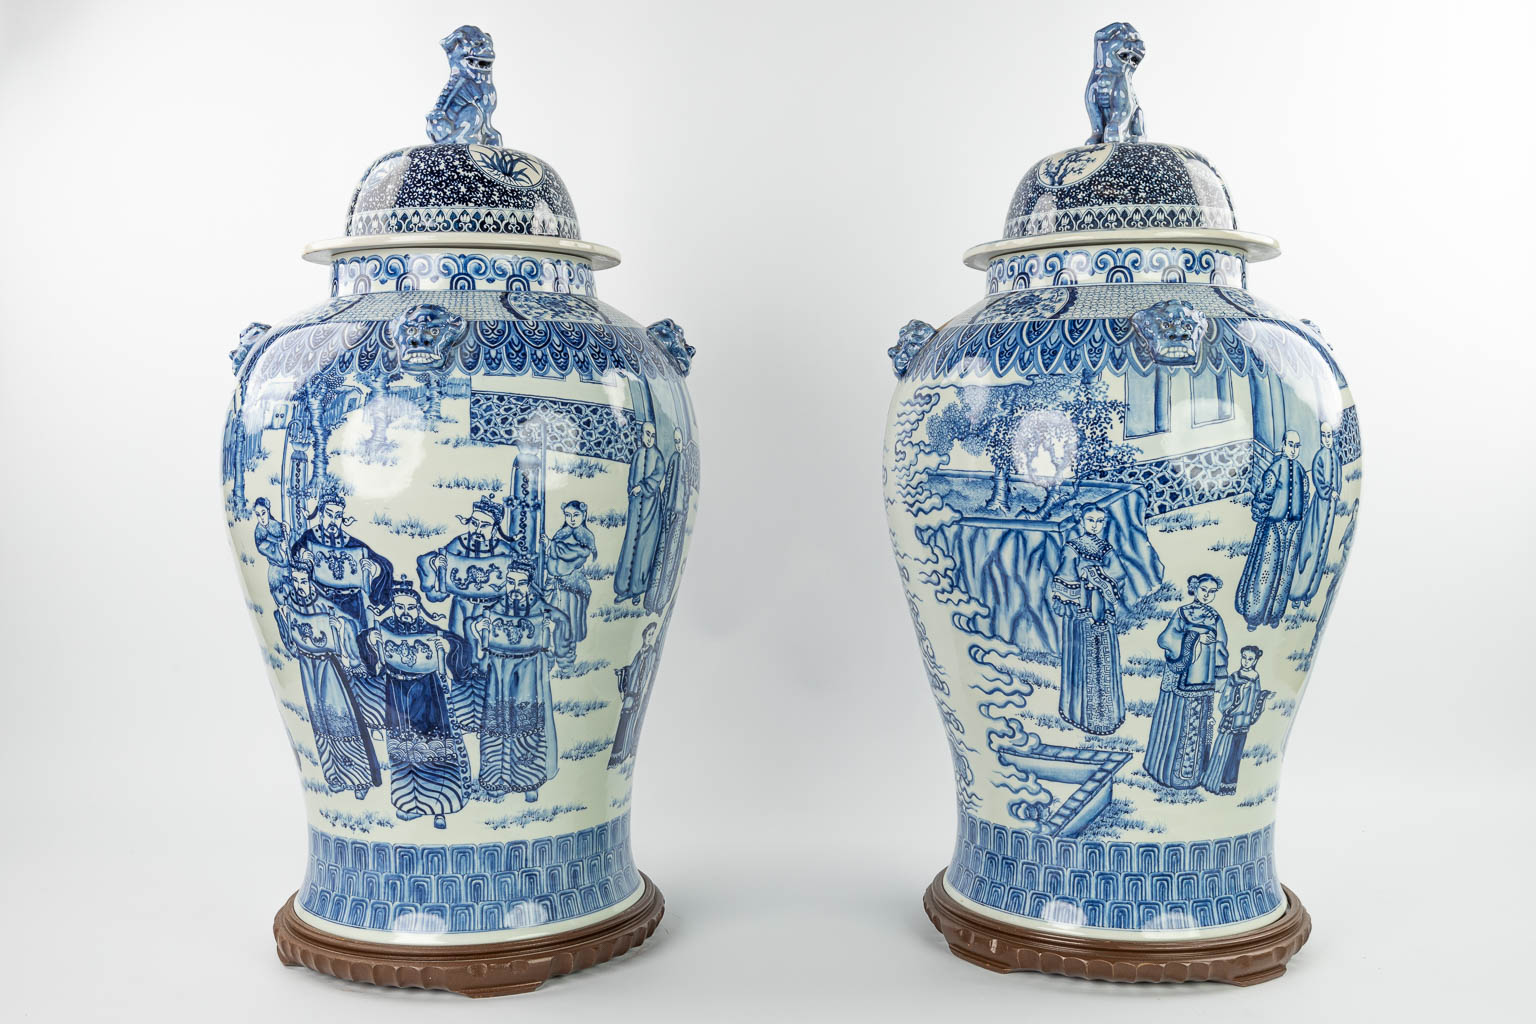 A pair of large Chinese vases with lid, made of blue-white porcelain with the emperor, dragons and w - Image 9 of 15